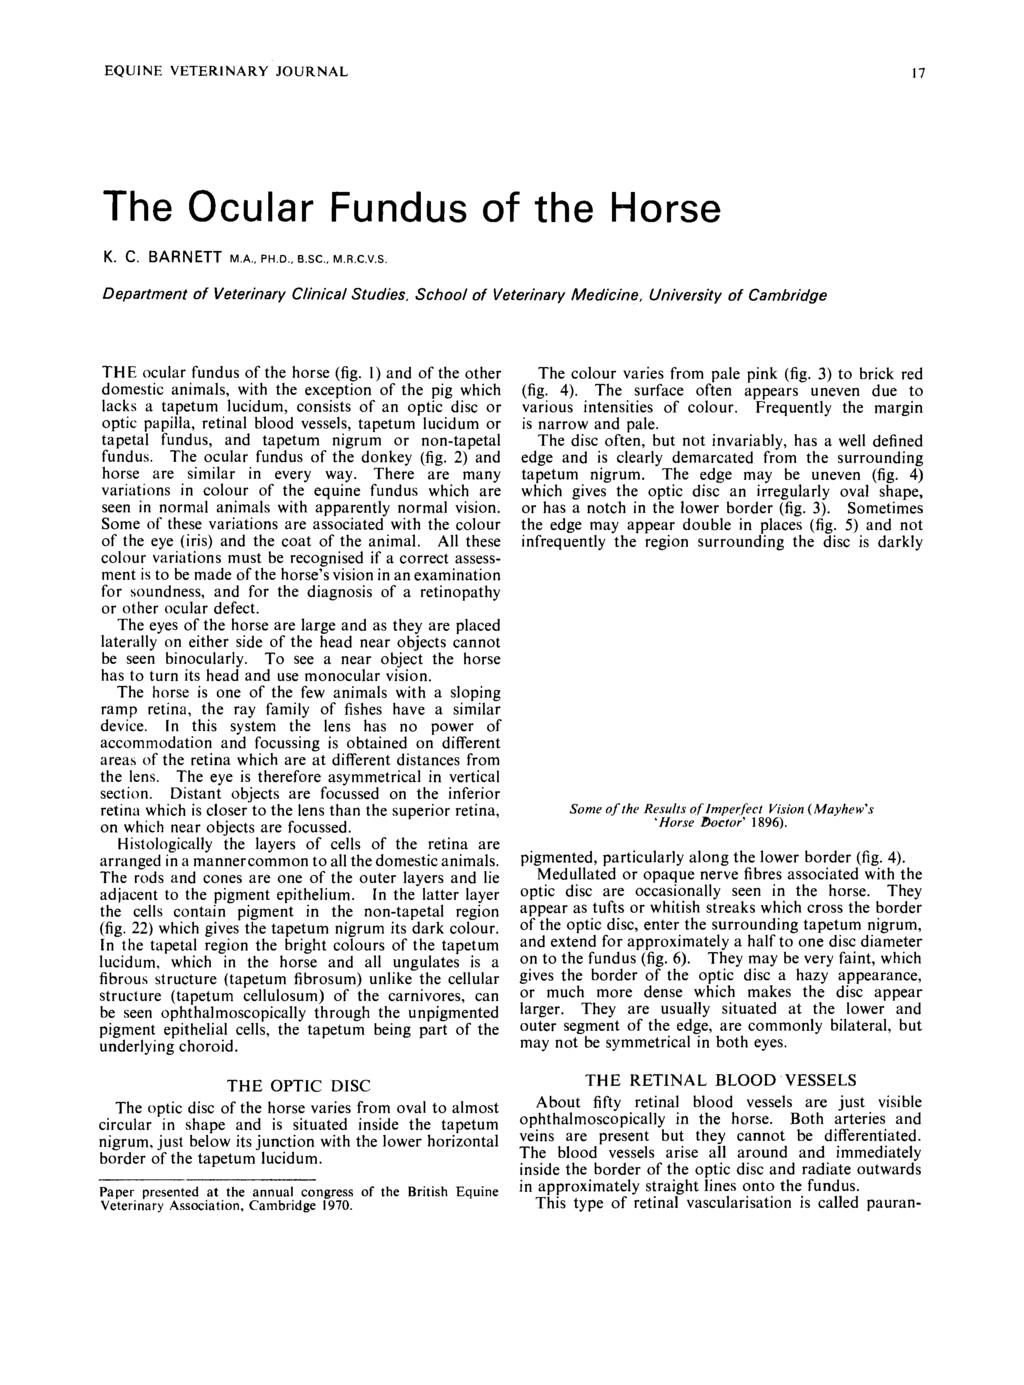 EQUINE VETERINARY JOURNAL 17 The Ocular Fundus of the Horse K. c. BARNETT M.A., PH.D., B.SC., M.R.C.V.S. Department of Veterinary Clinical Studies.